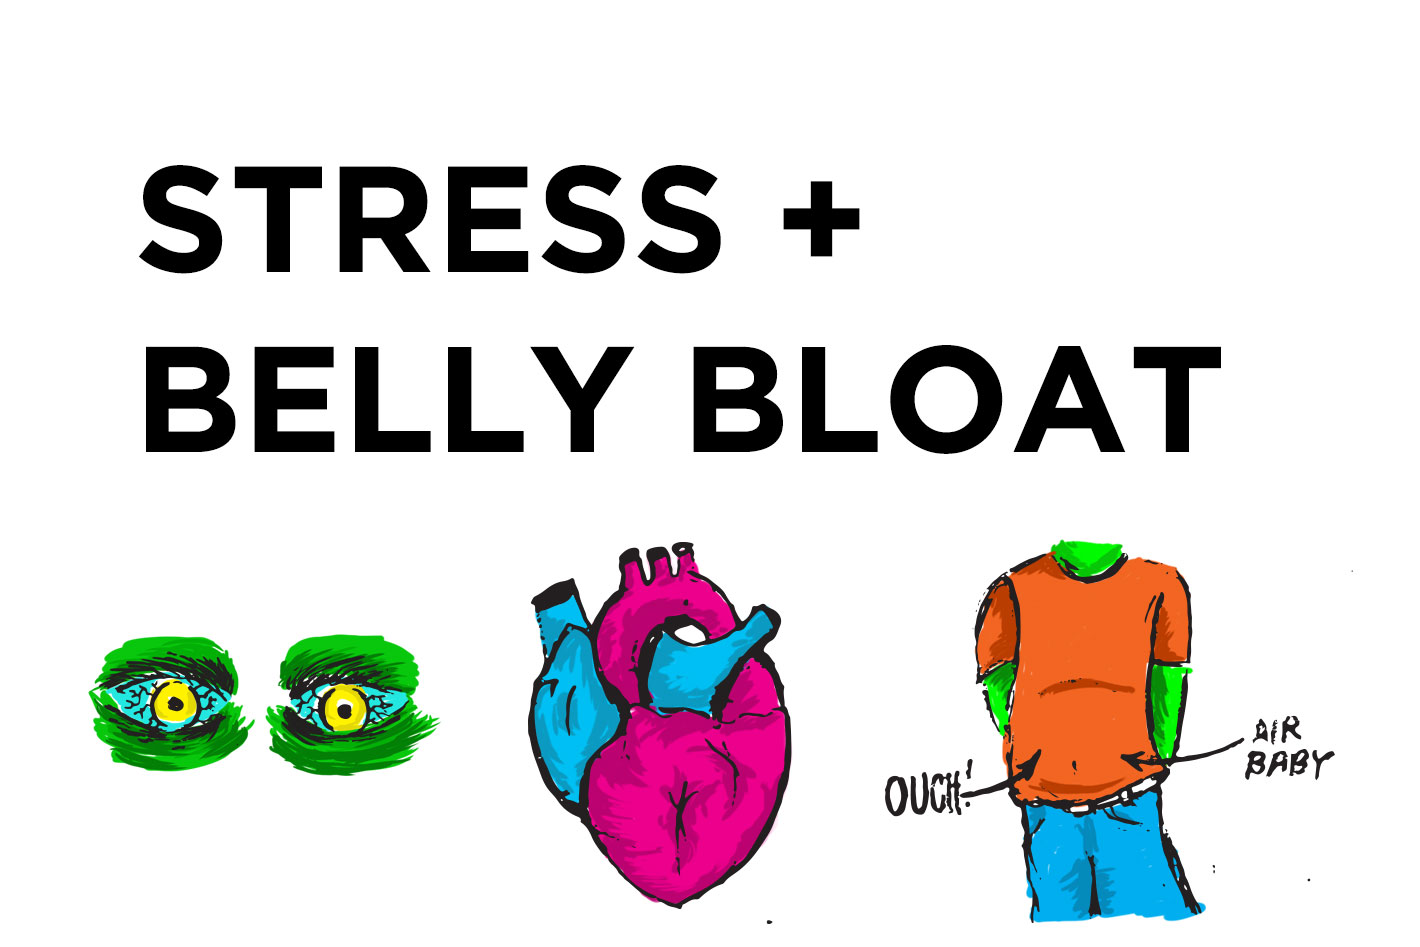 Yes, stress can cause bloating. Here's what to do